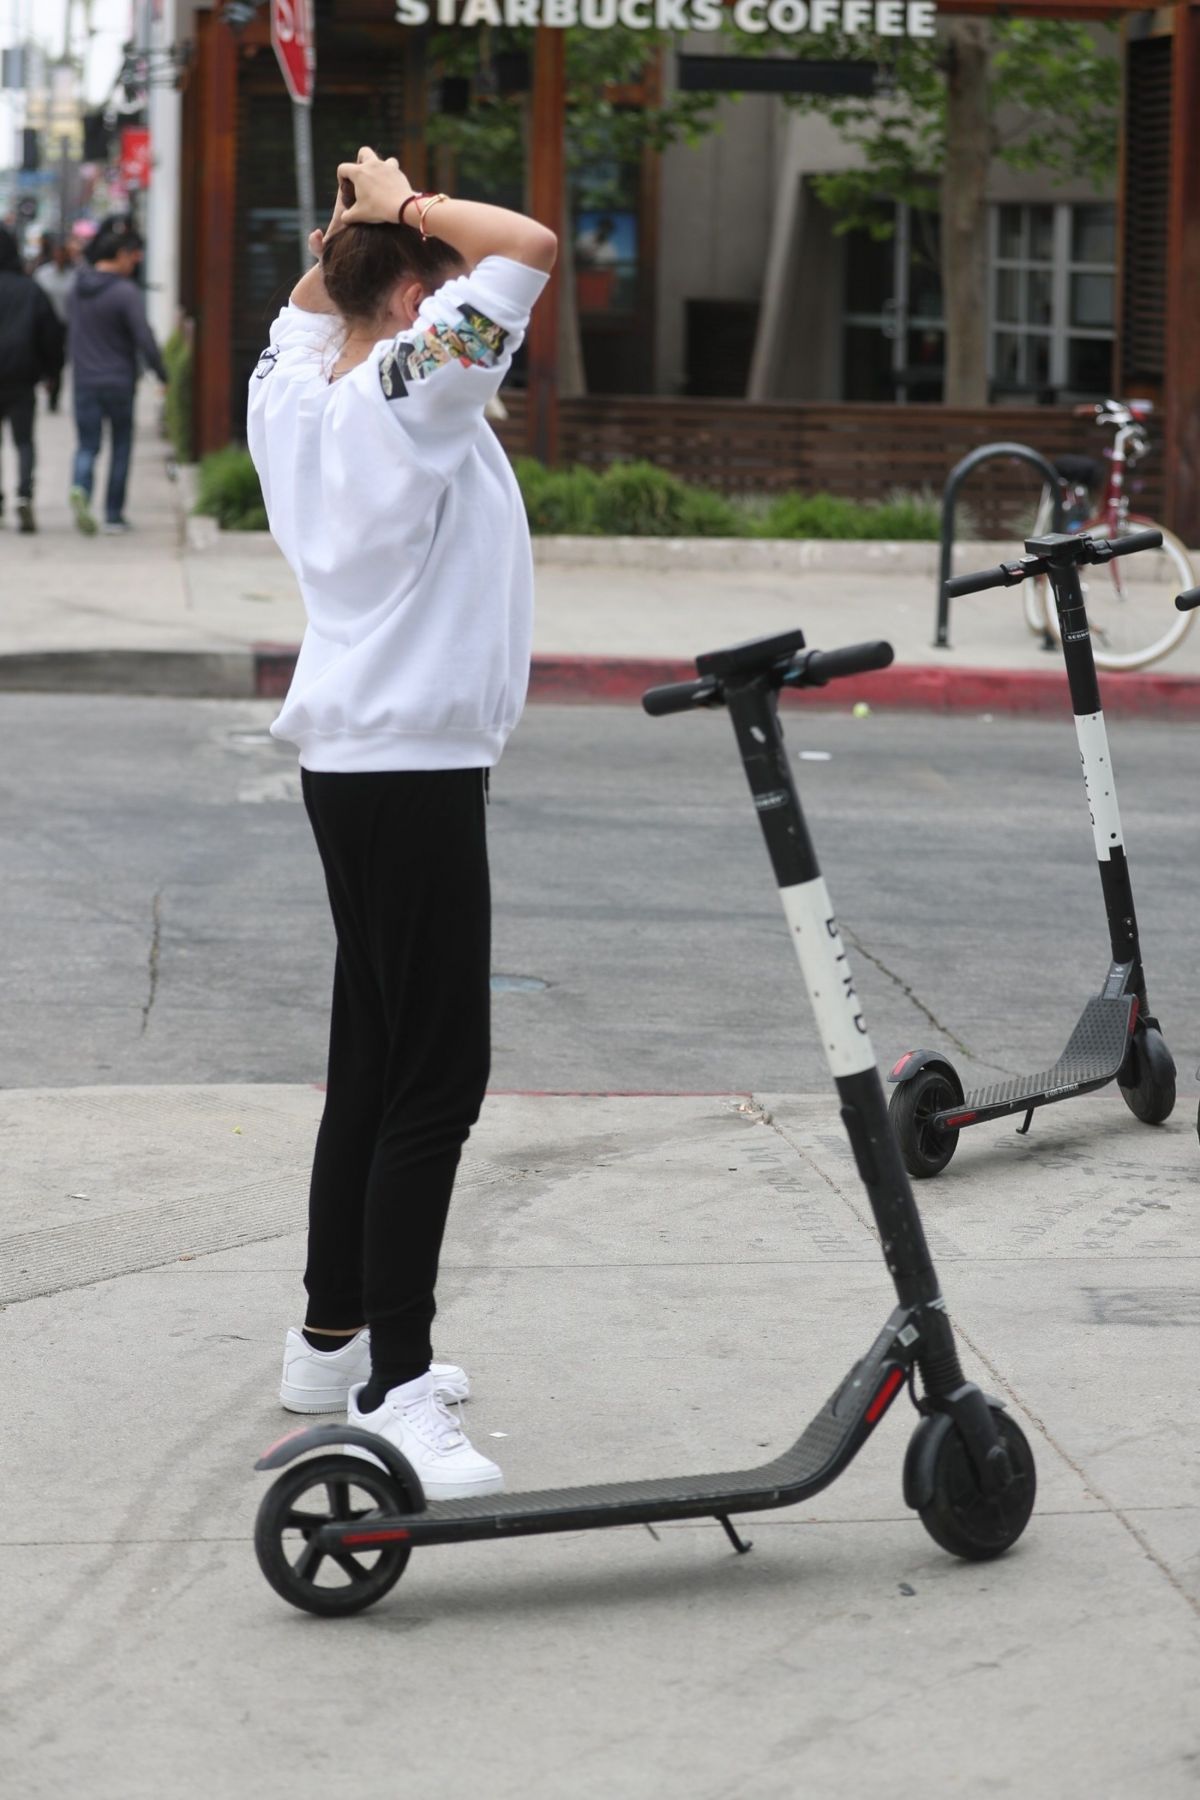 thylane-blondeau-and-samuel-bensoussan-riding-bird-scooters-in-west-hollywood-04-27-2019-1.jpg